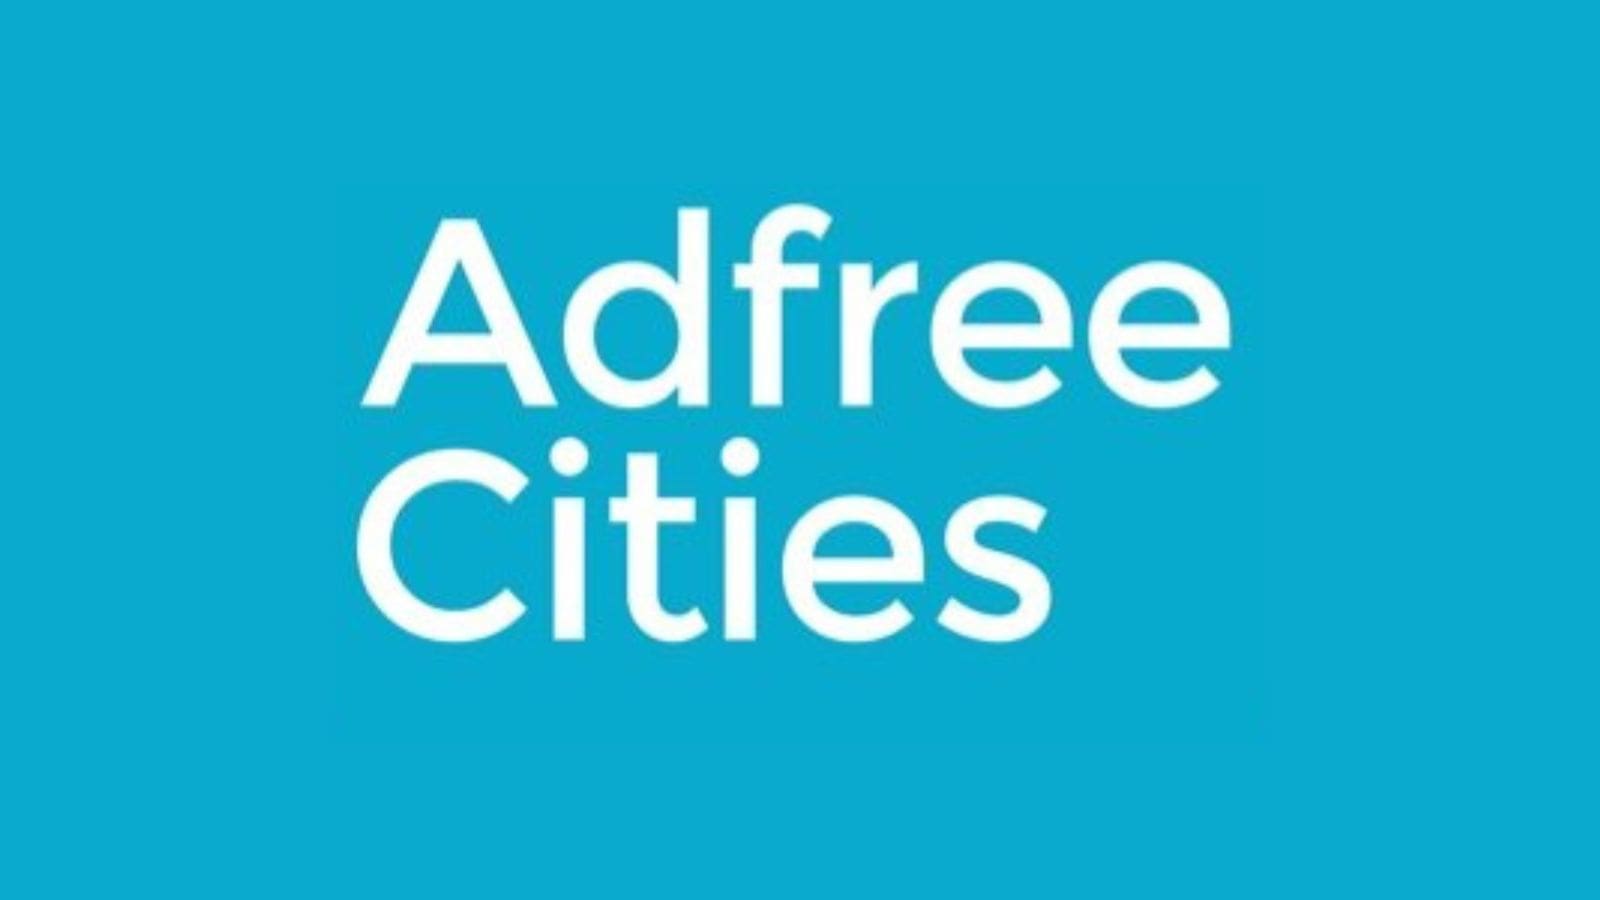 The words "Adfree Cities" on a turquoise background.